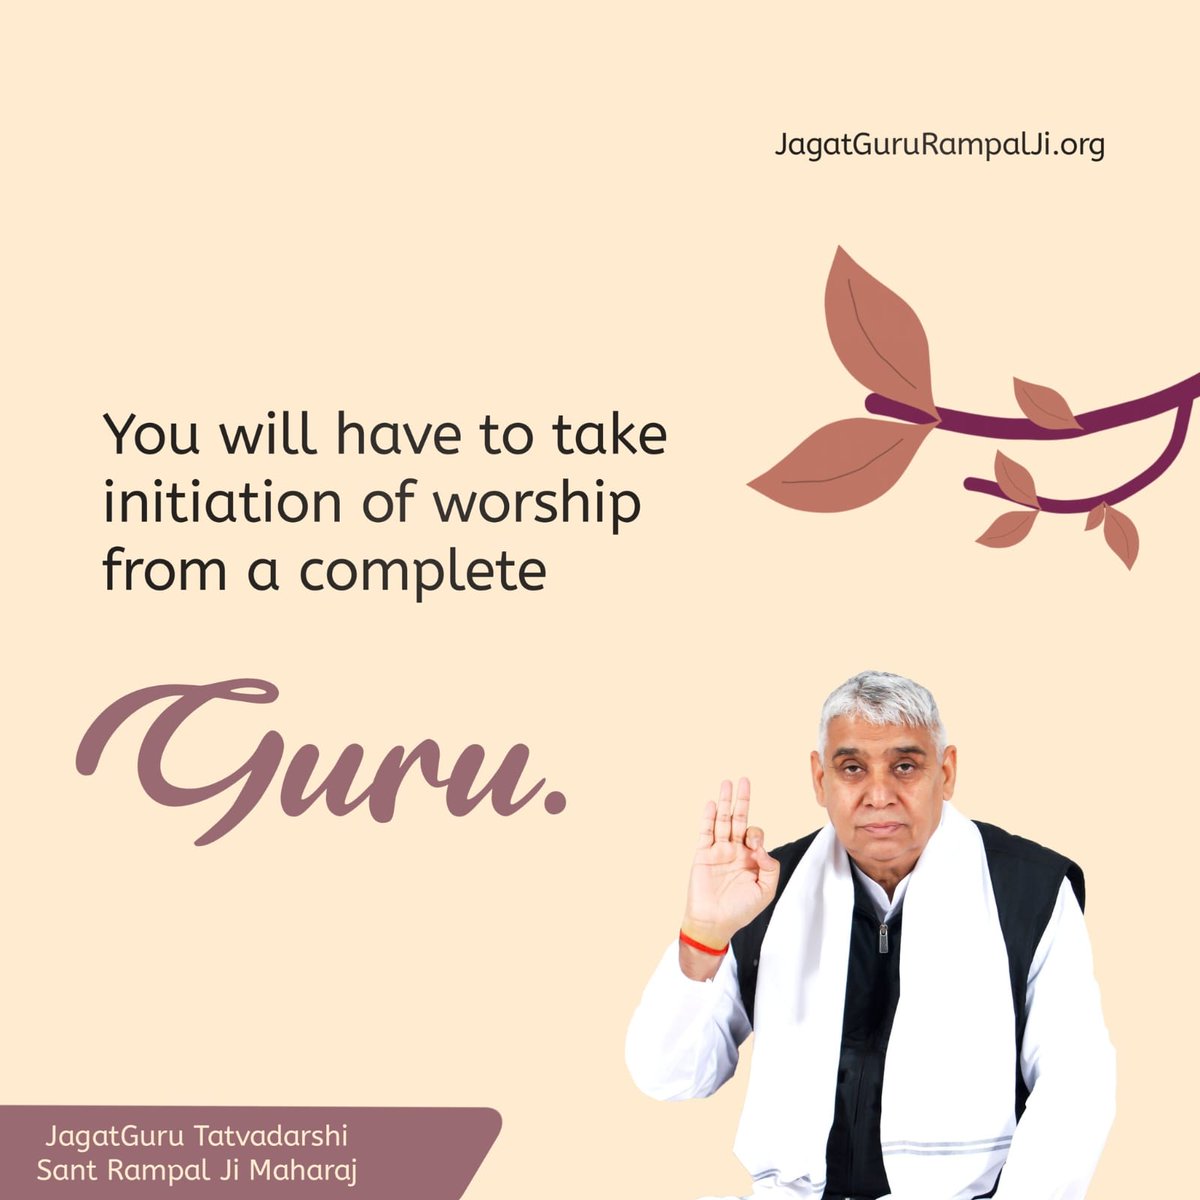 #GodMorningWednesday
You will have to take initiation of Worship from a Complete Guru.
#SaintRampalJiQuotes